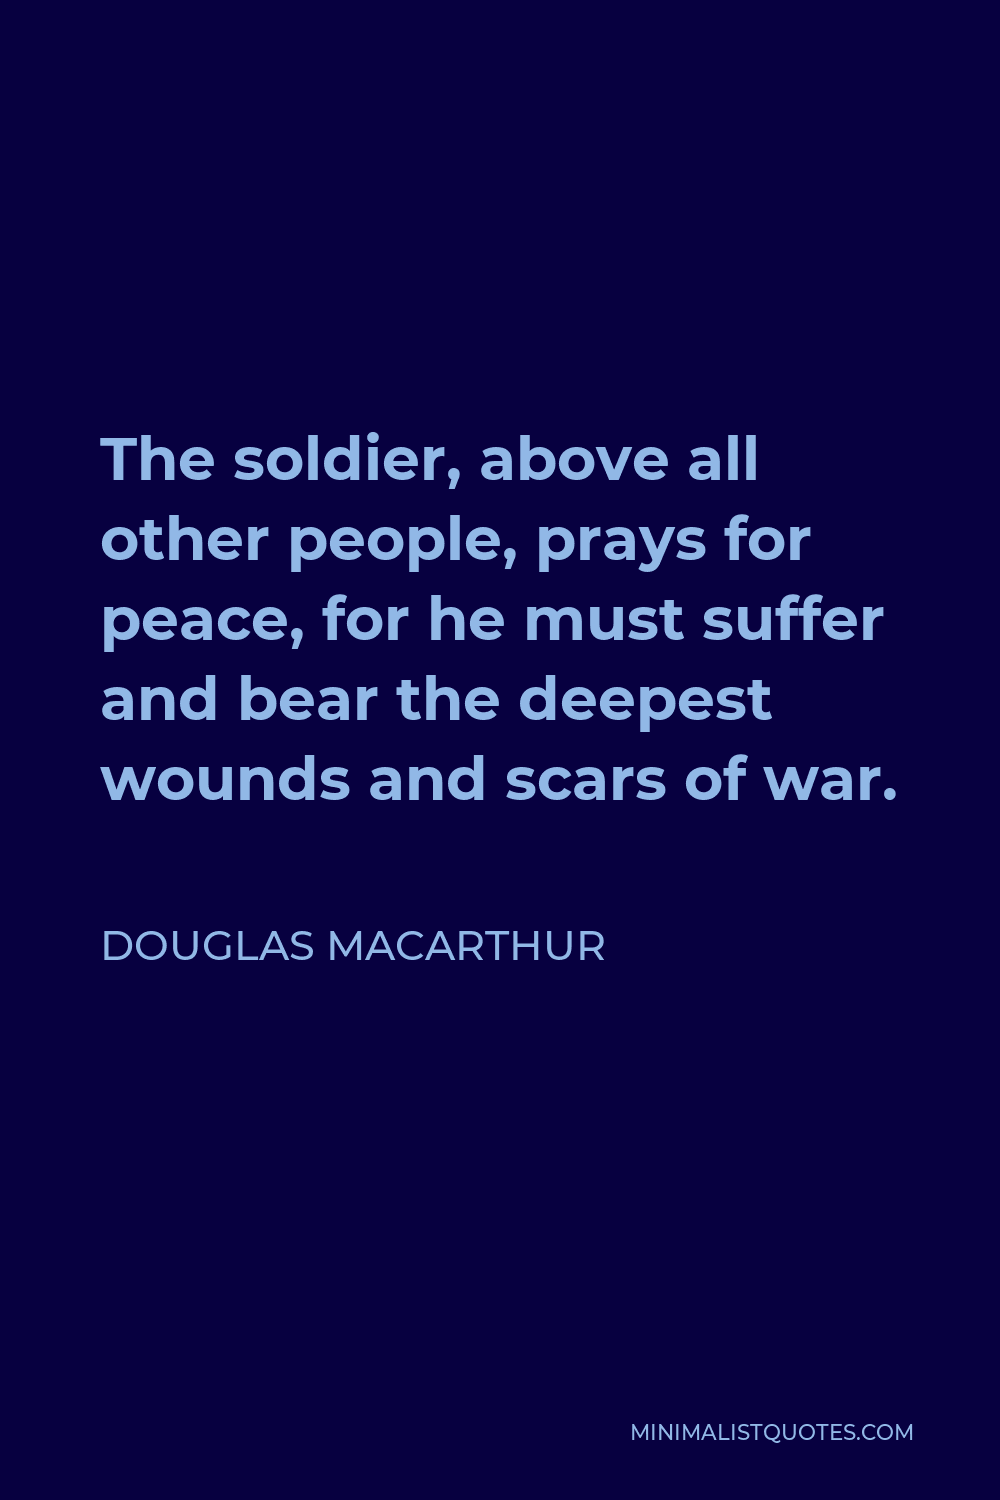 Douglas MacArthur Quote - The soldier, above all other people, prays for peace, for he must suffer and bear the deepest wounds and scars of war.